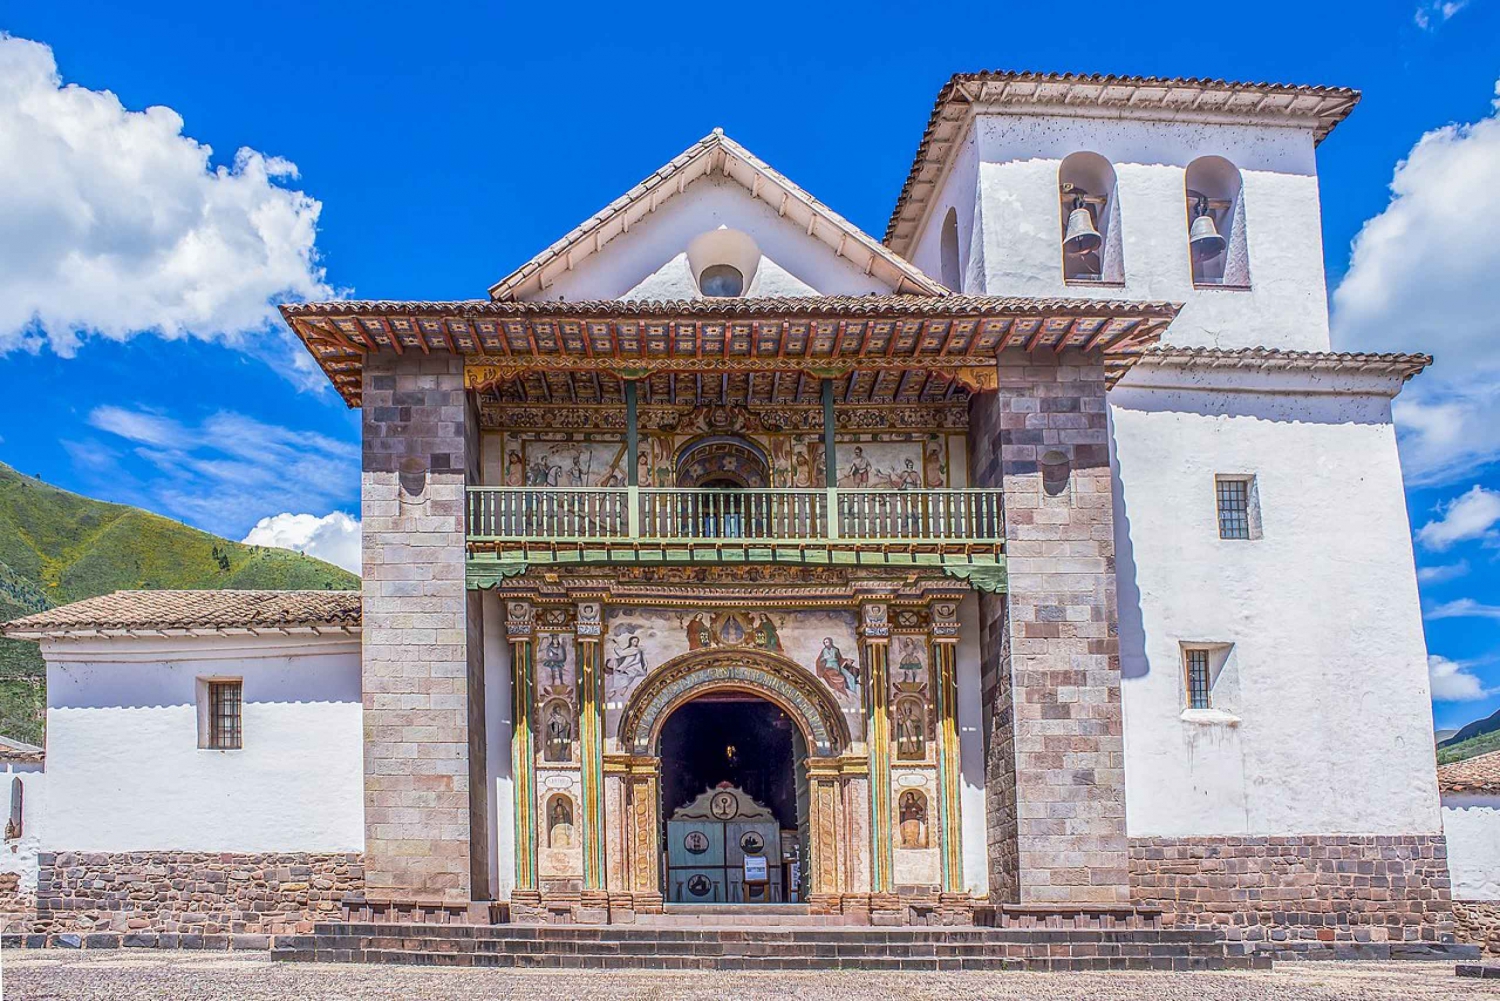 From Cusco: Ancestral Route of the Sun, Cusco - Puno Tour